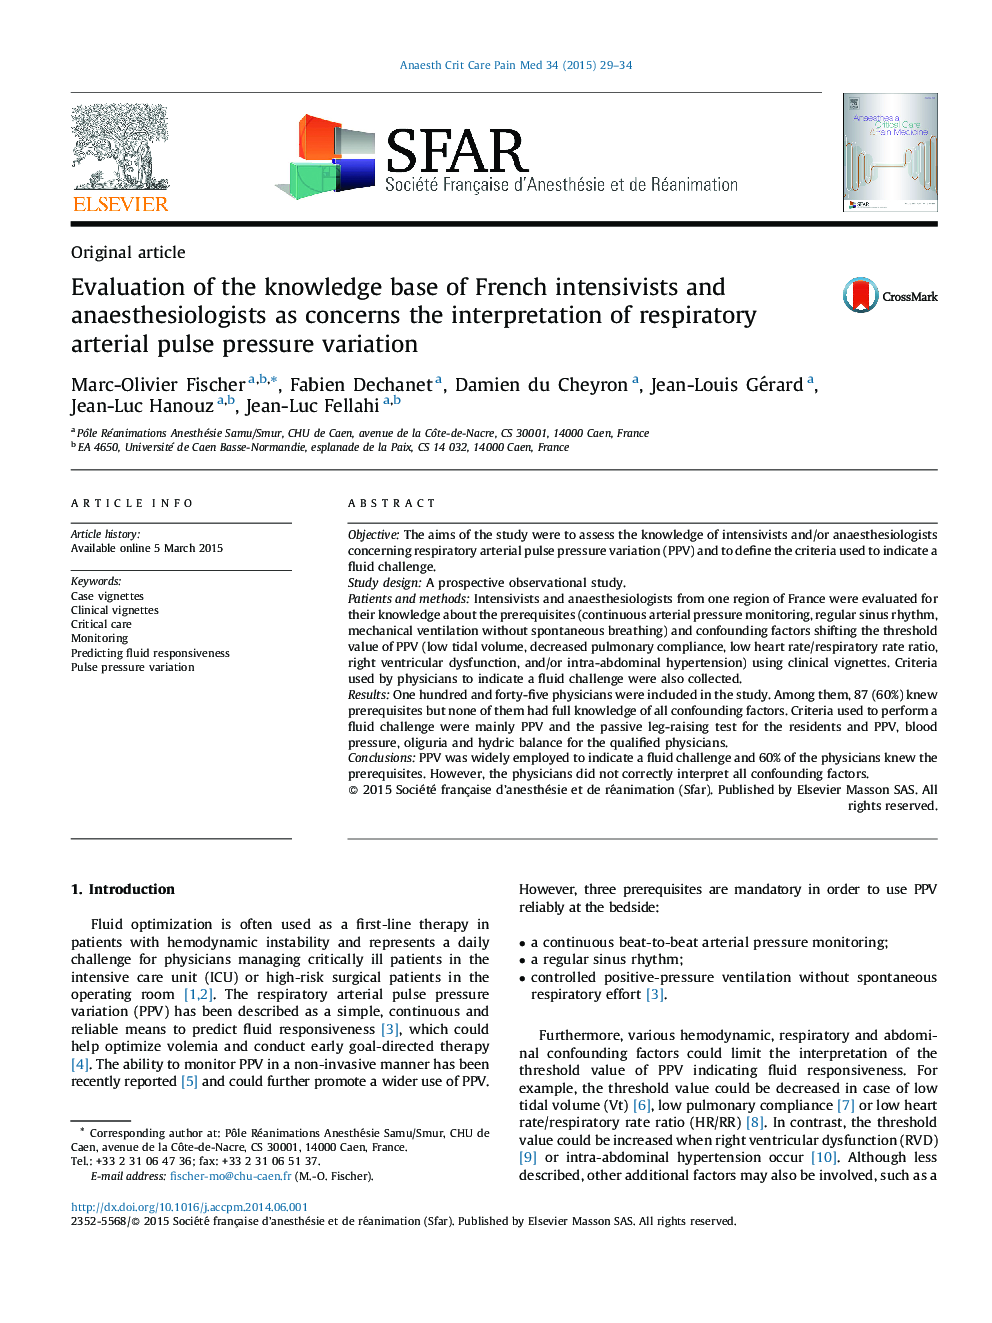 Evaluation of the knowledge base of French intensivists and anaesthesiologists as concerns the interpretation of respiratory arterial pulse pressure variation